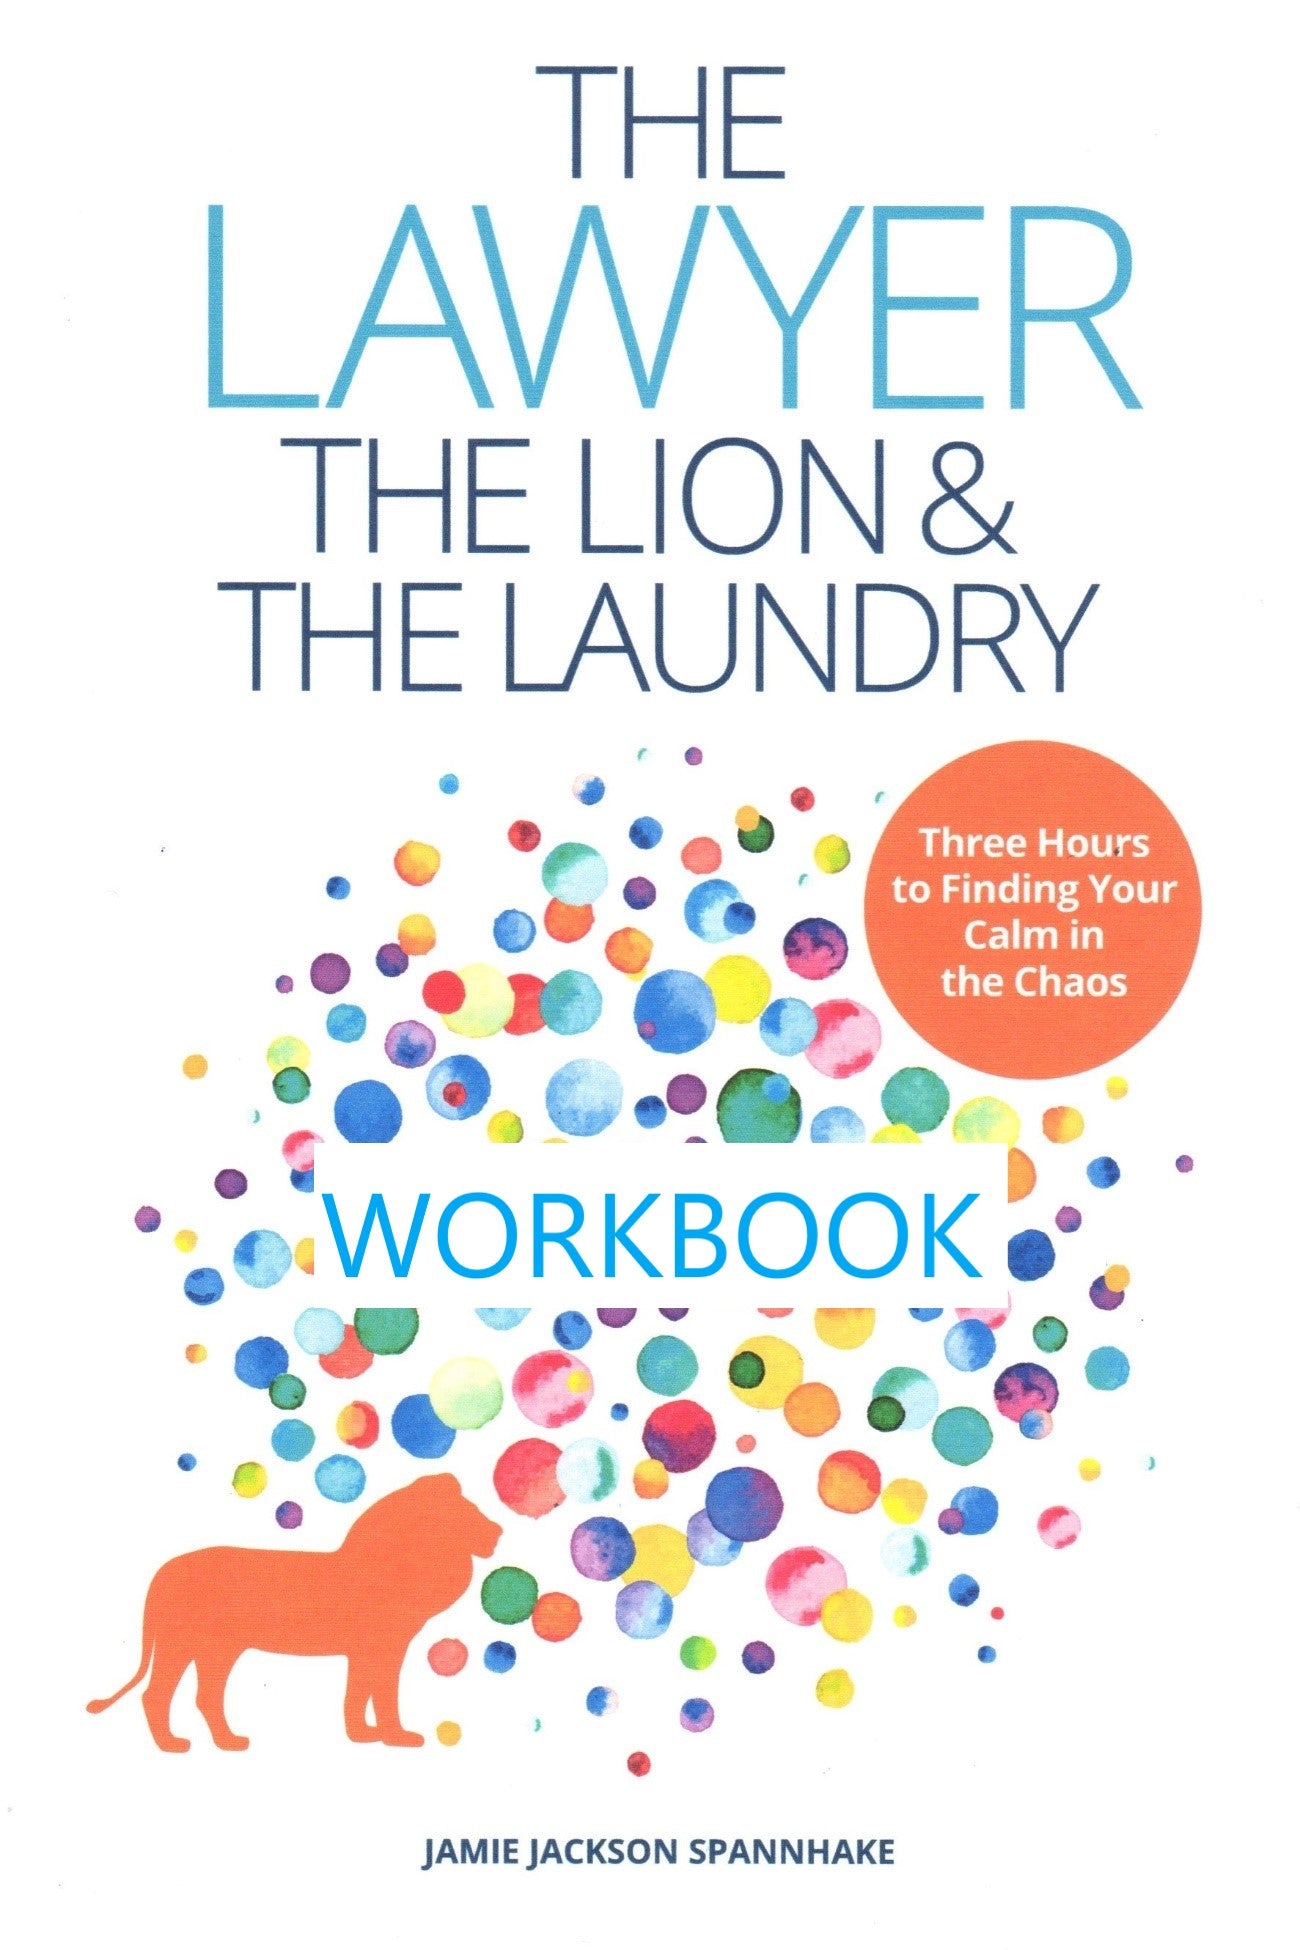 The Lawyer, the Lion, & the Laundry Workbook